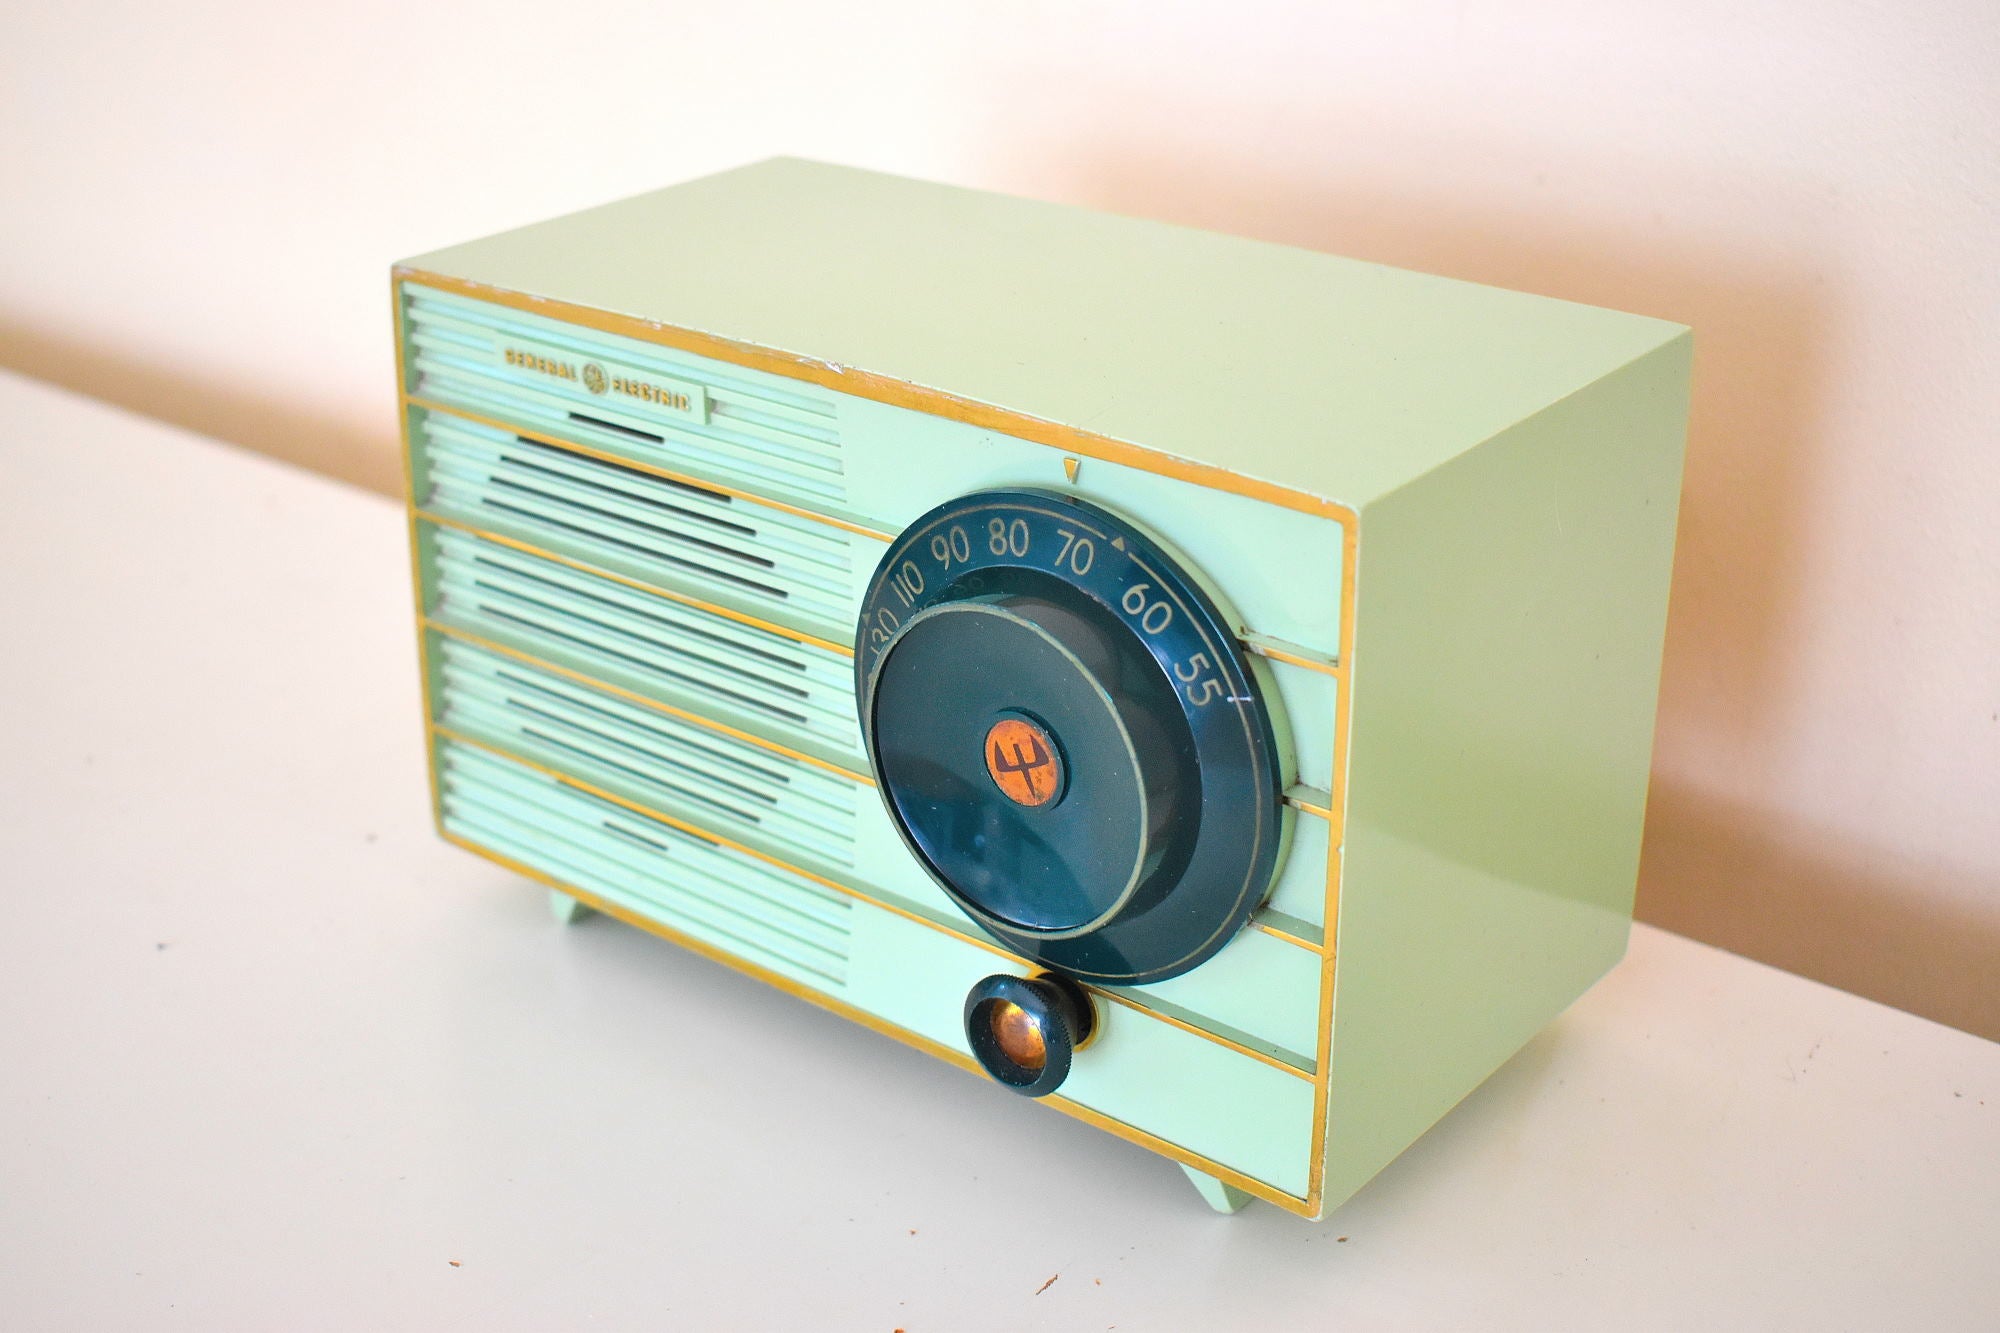 Pistachio Green 1955 General Electric Model 457S AM Vacuum Tube Radio Rare Colorway! Sounds Great!